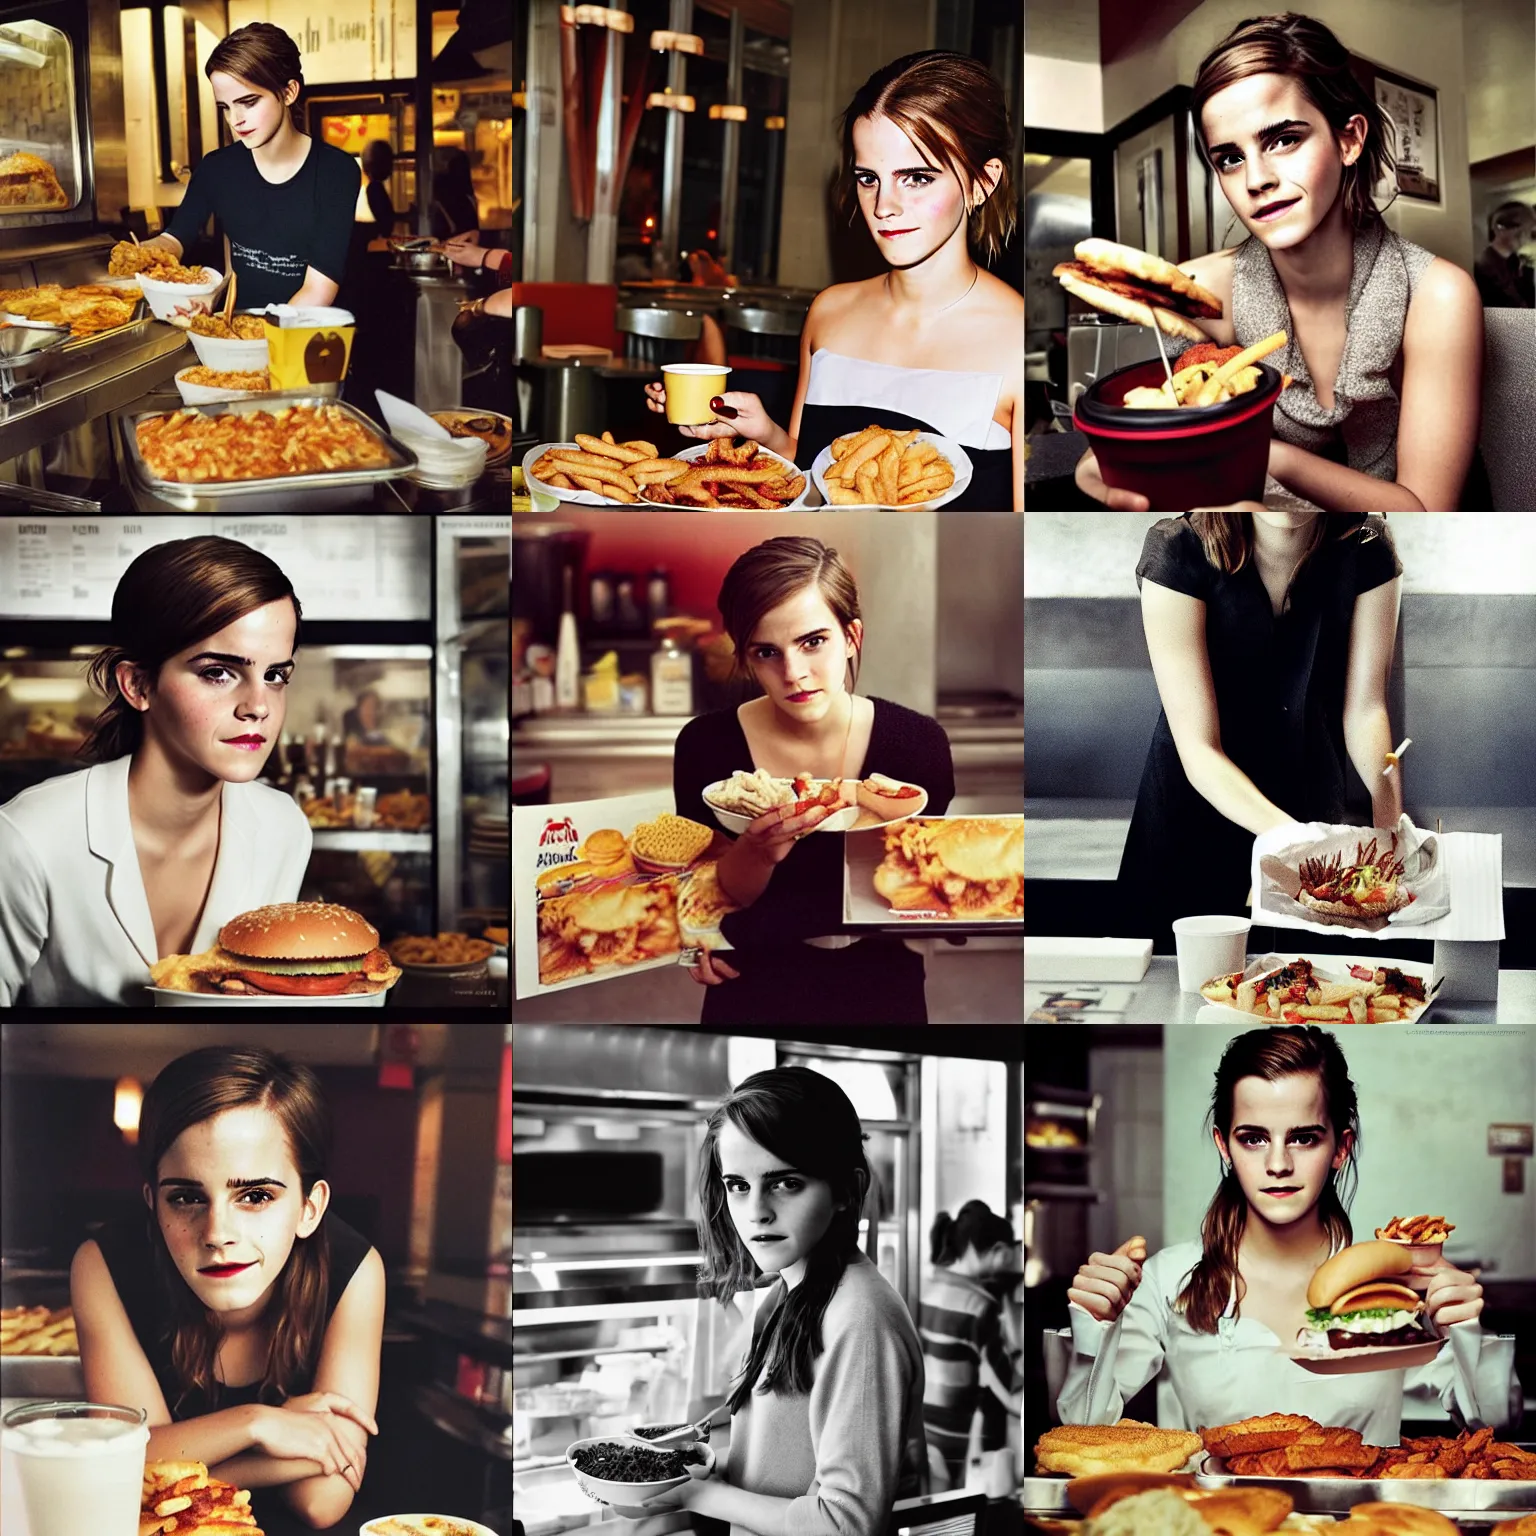 Prompt: emma watson serving food at mcdonald's, portrait photography by annie leibovitz